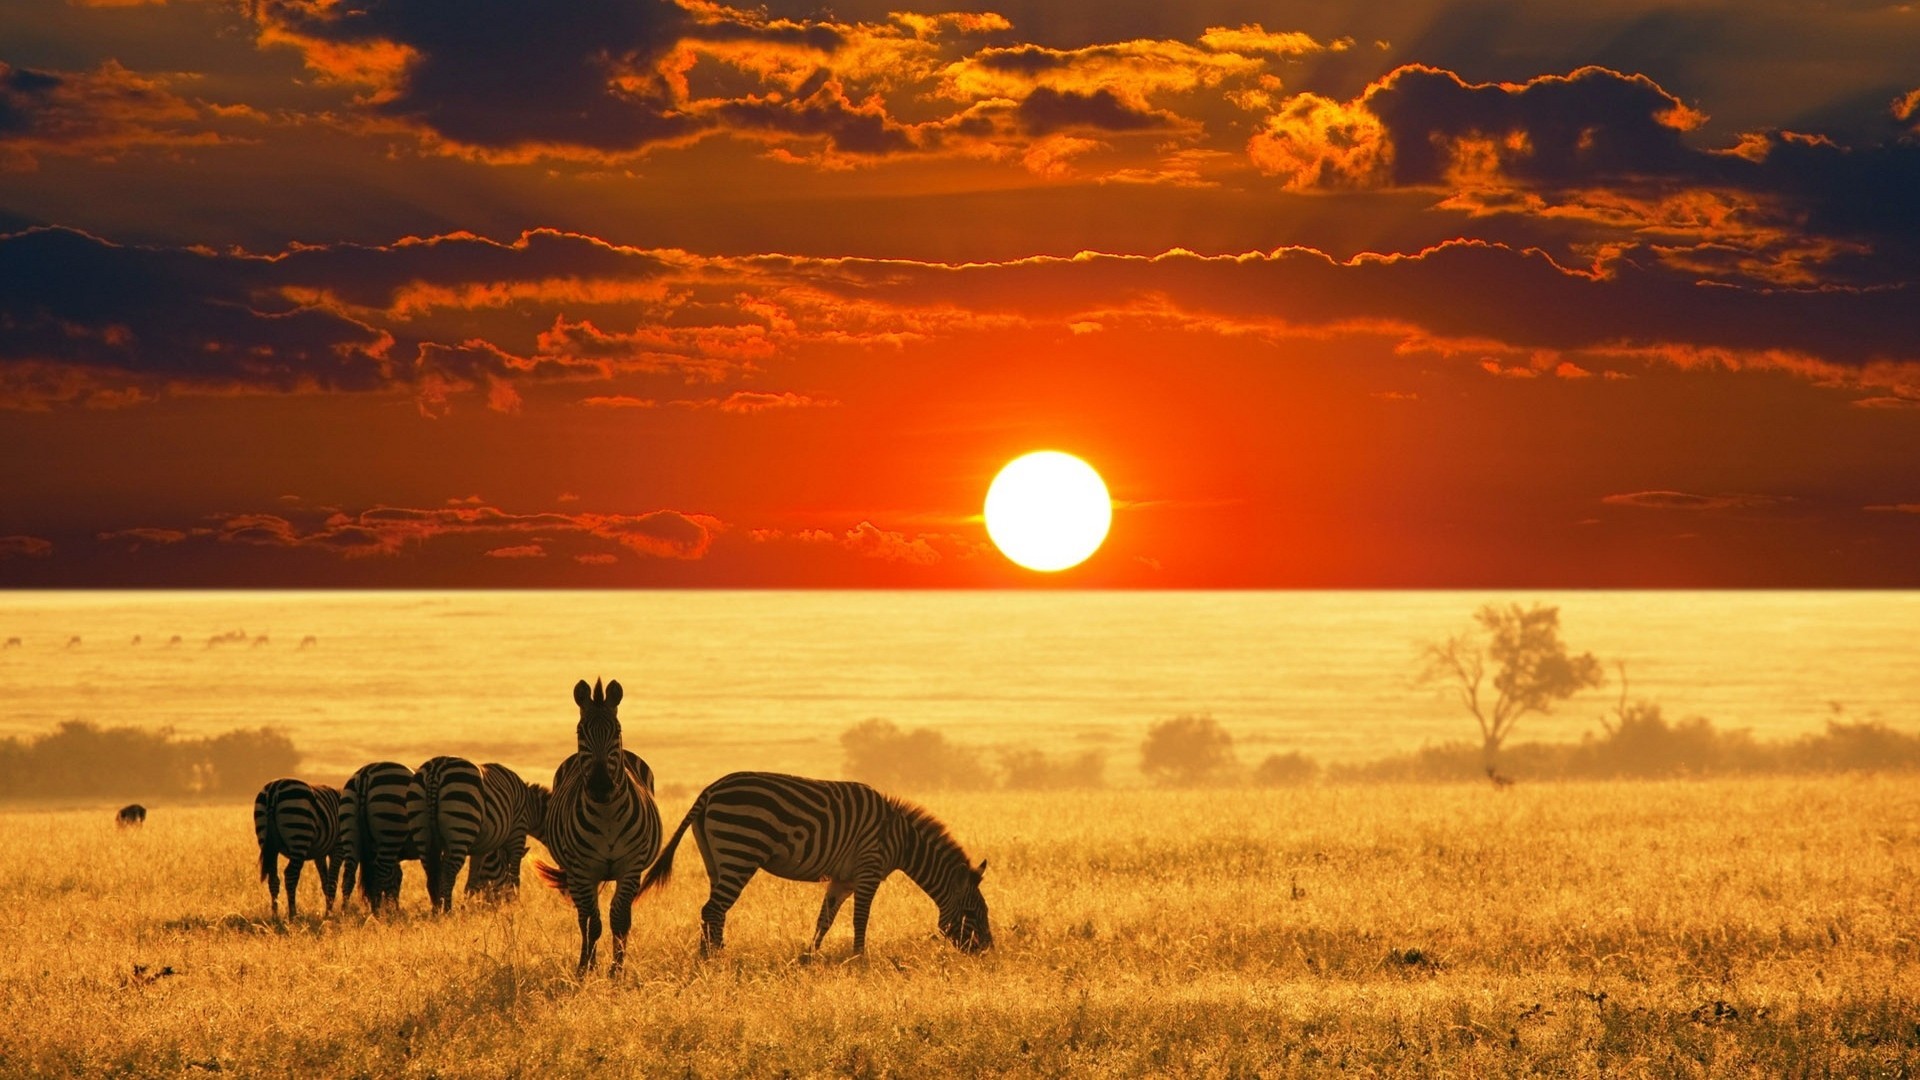 1920x1080 african safari animals wallpaper hd hd wallpapers desktop images download  free colourful 4k picture artwork lovely 1920Ã1080 Wallpaper HD